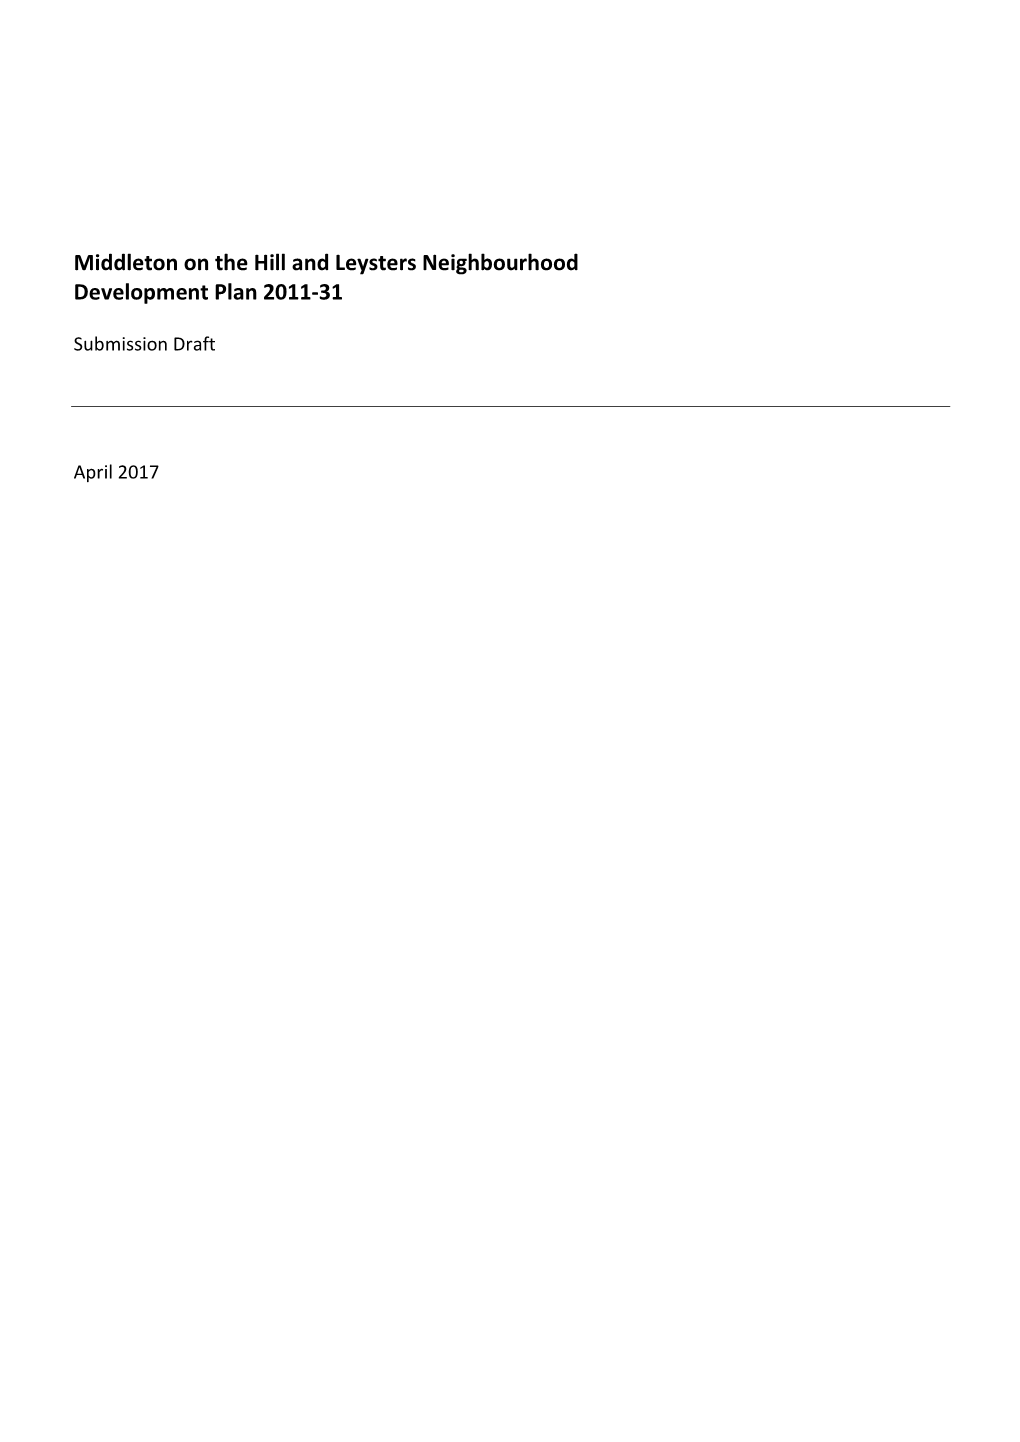 Middleton on the Hill and Leysters Neighbourhood Development Plan April 2017 Submission Draft